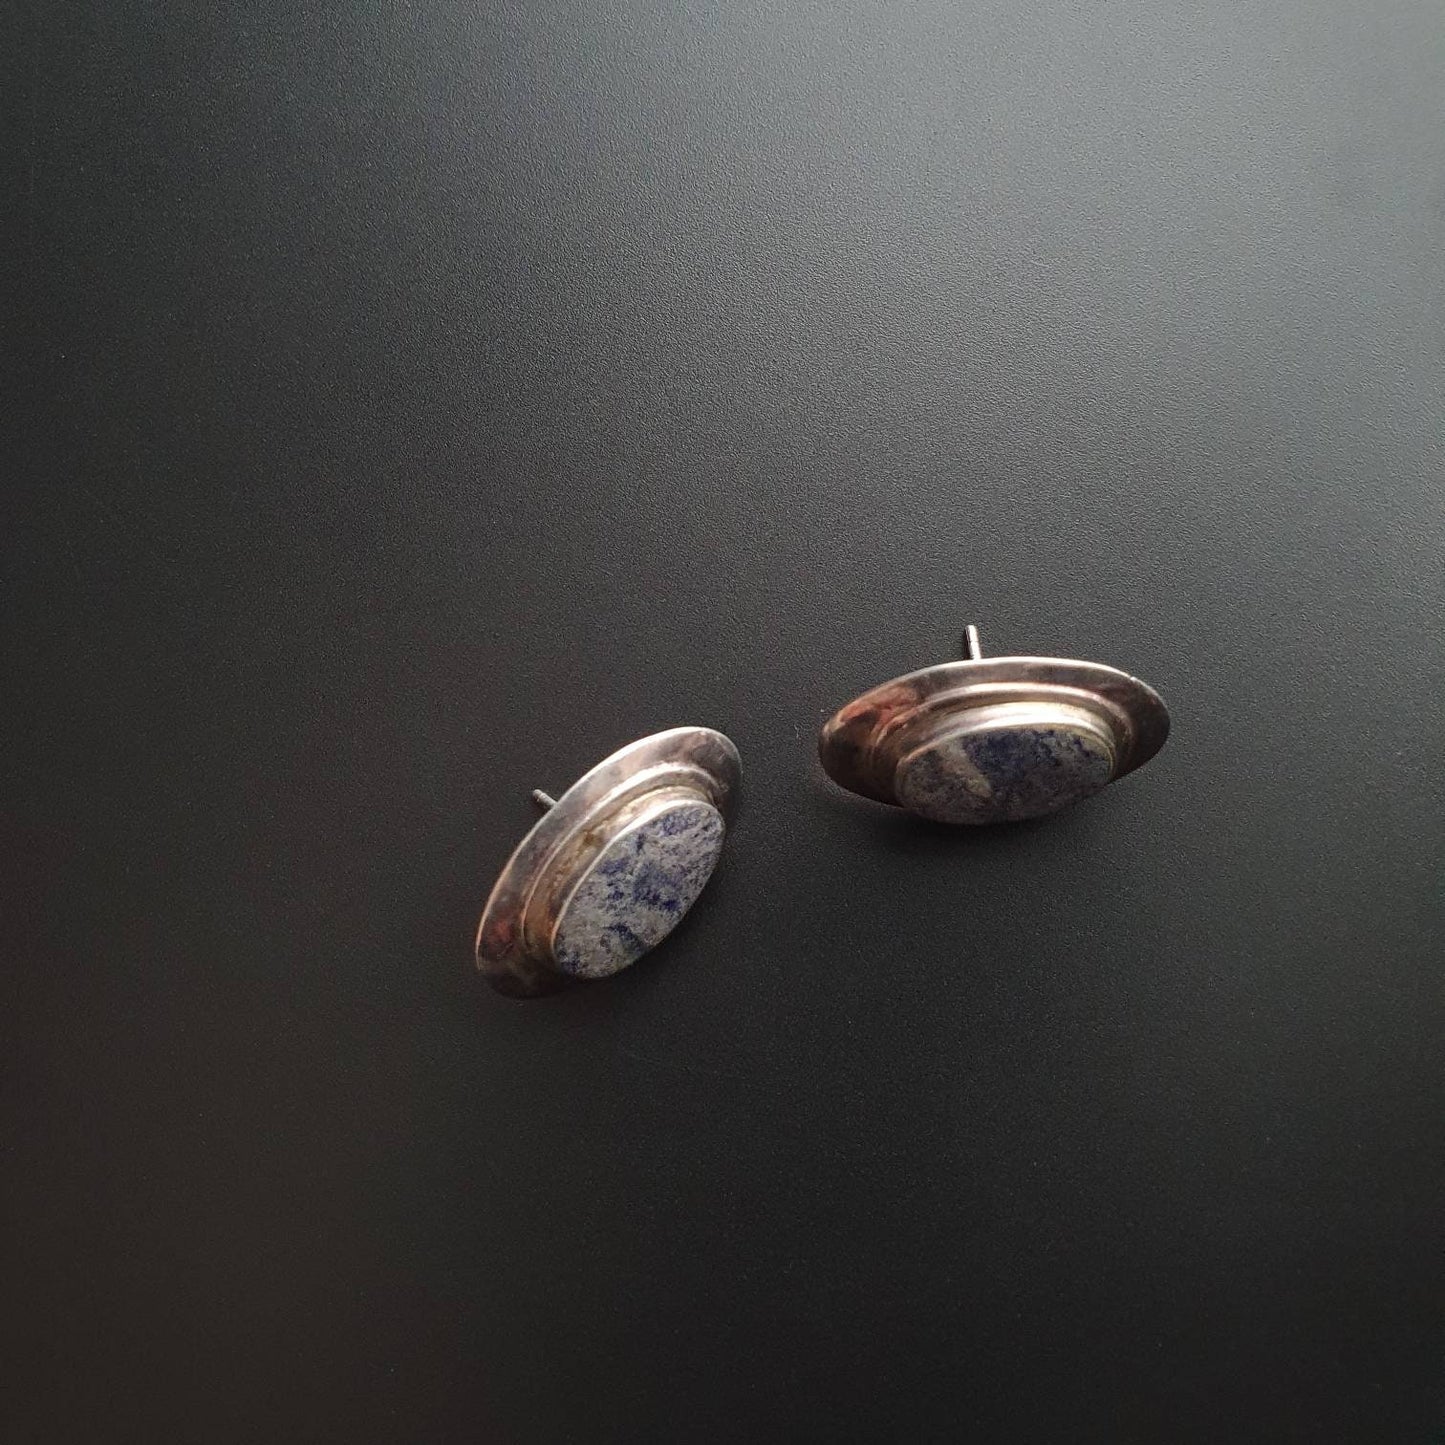 Stud earrings, Lapis gemstone, sterling silver, oval,vintage jewelry, unique,gifts,classical, Victorian, dainty jewellery,handmade jewelry